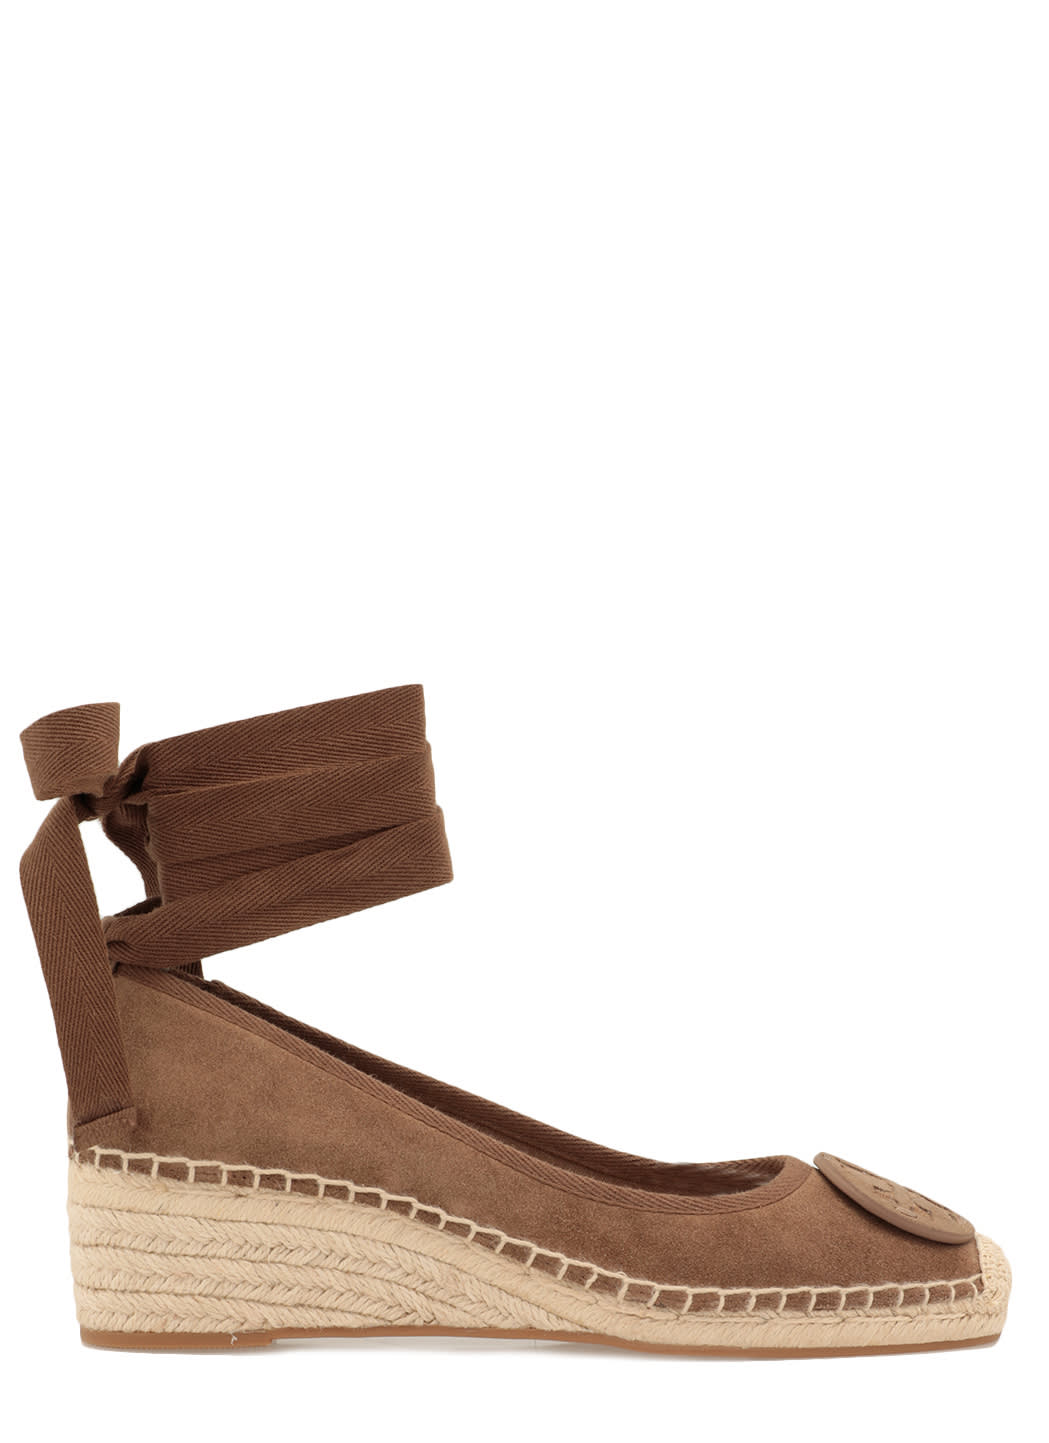 Buy Tory Burch Espadrilla In Pelle Scamosciata online, shop Tory Burch shoes with free shipping